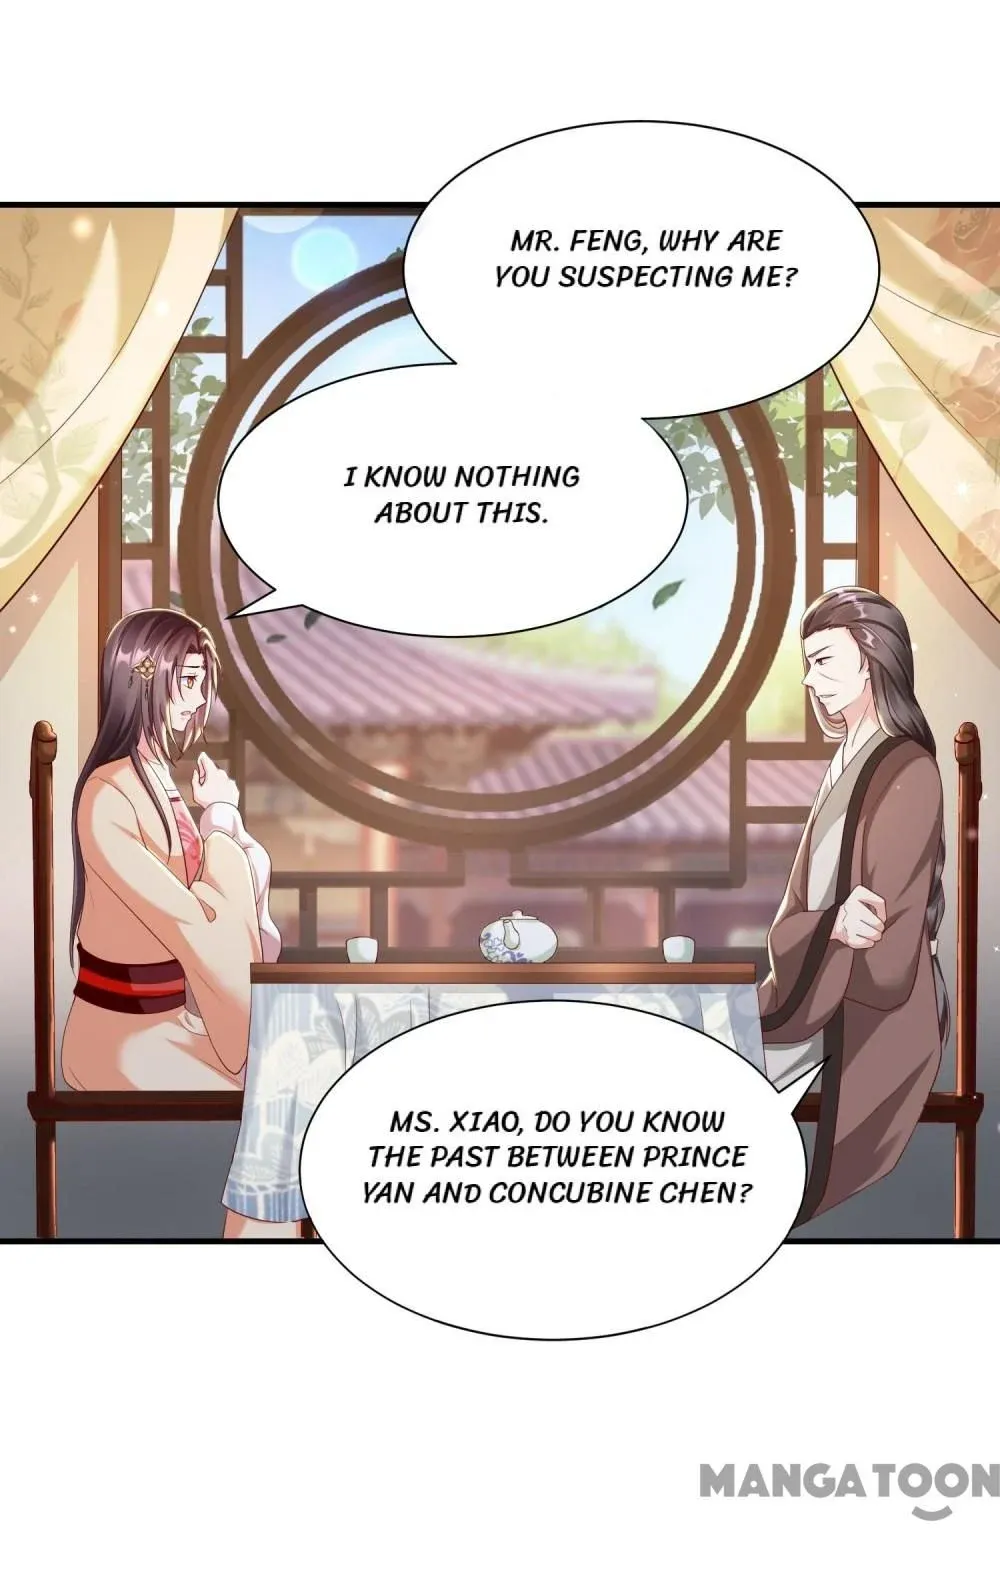 Why The Princess Acts Like White Lotus - Page 1